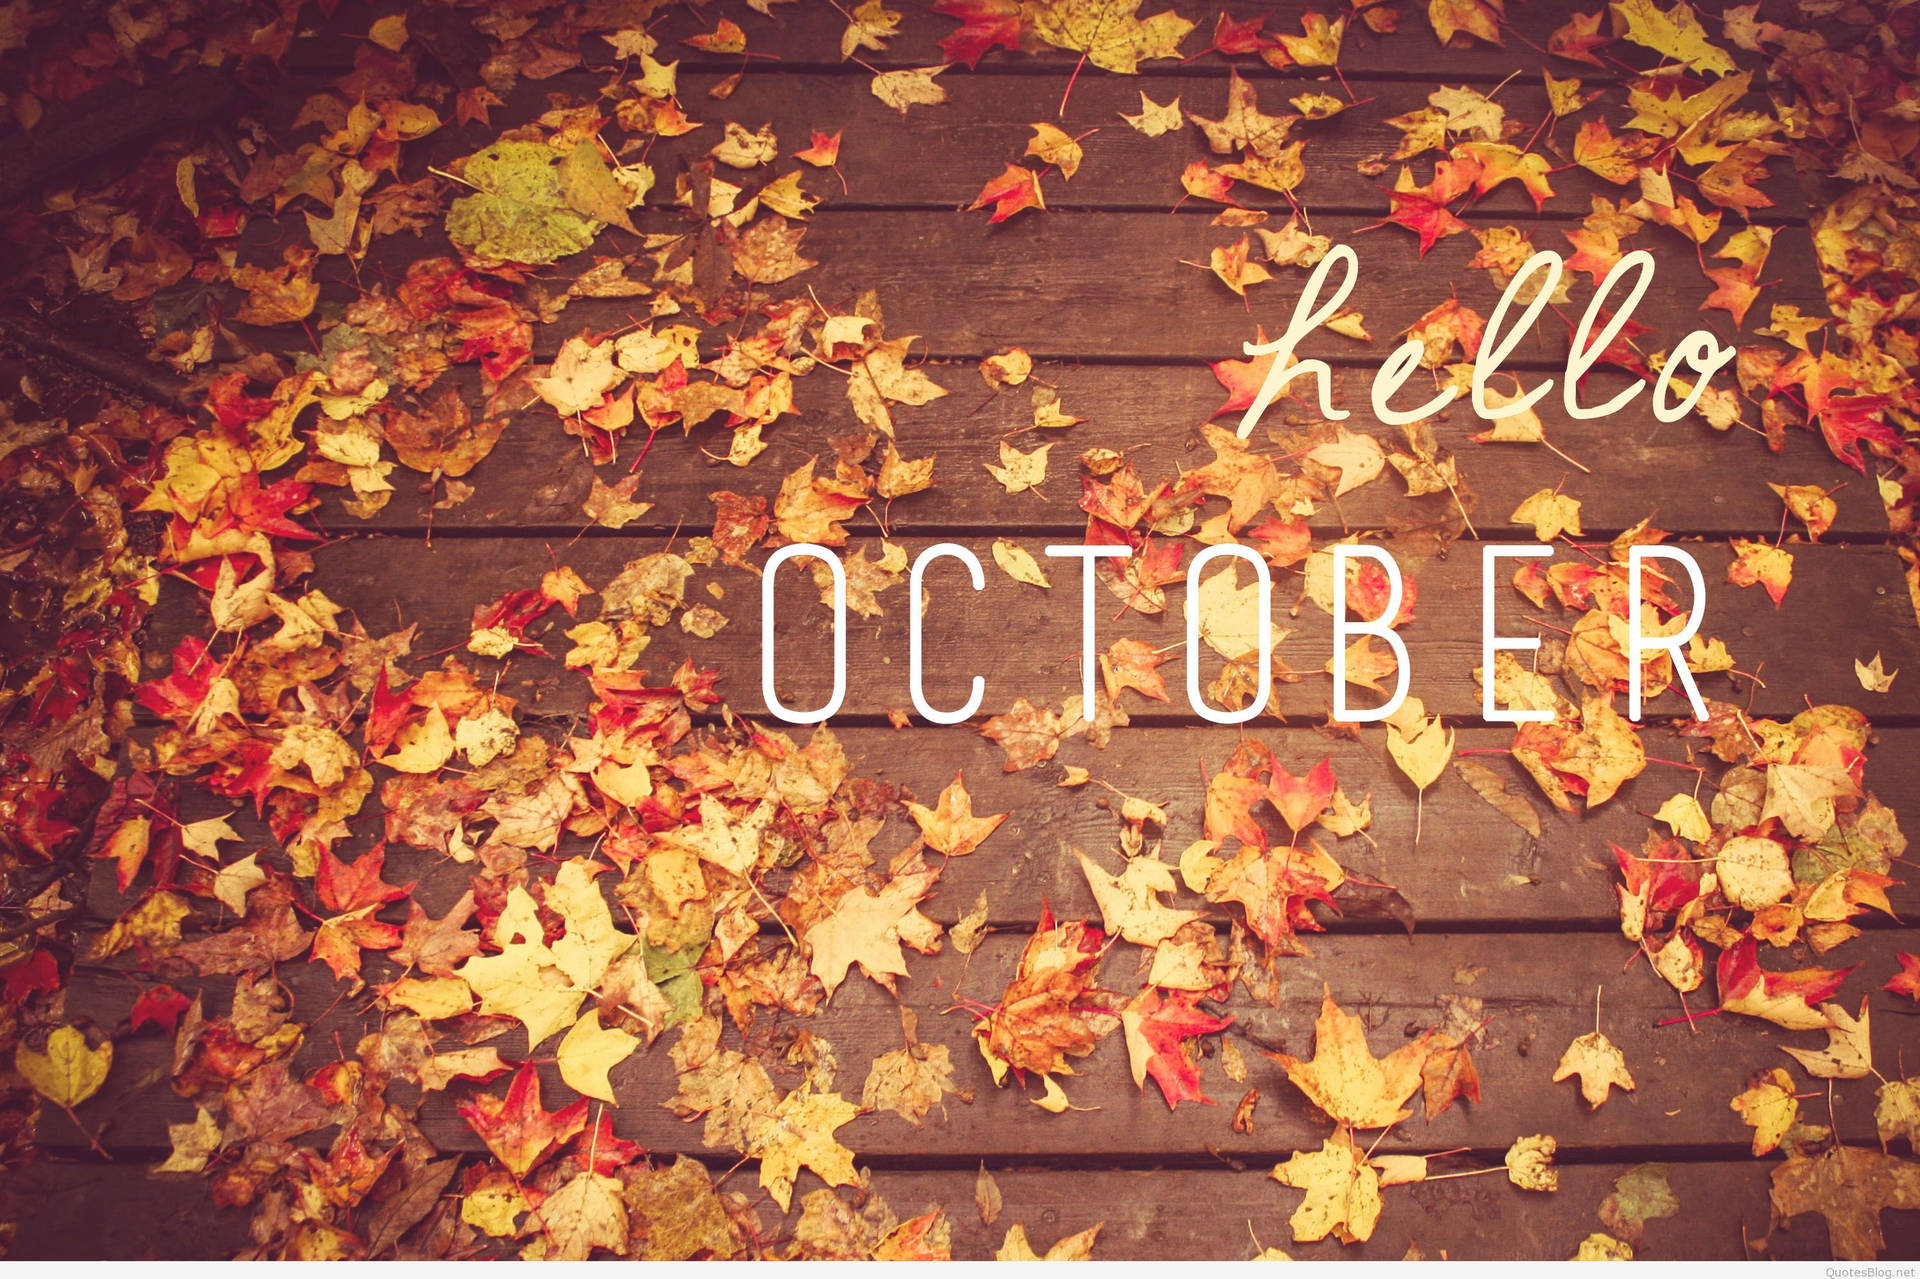 Spread the Love this October Wallpaper